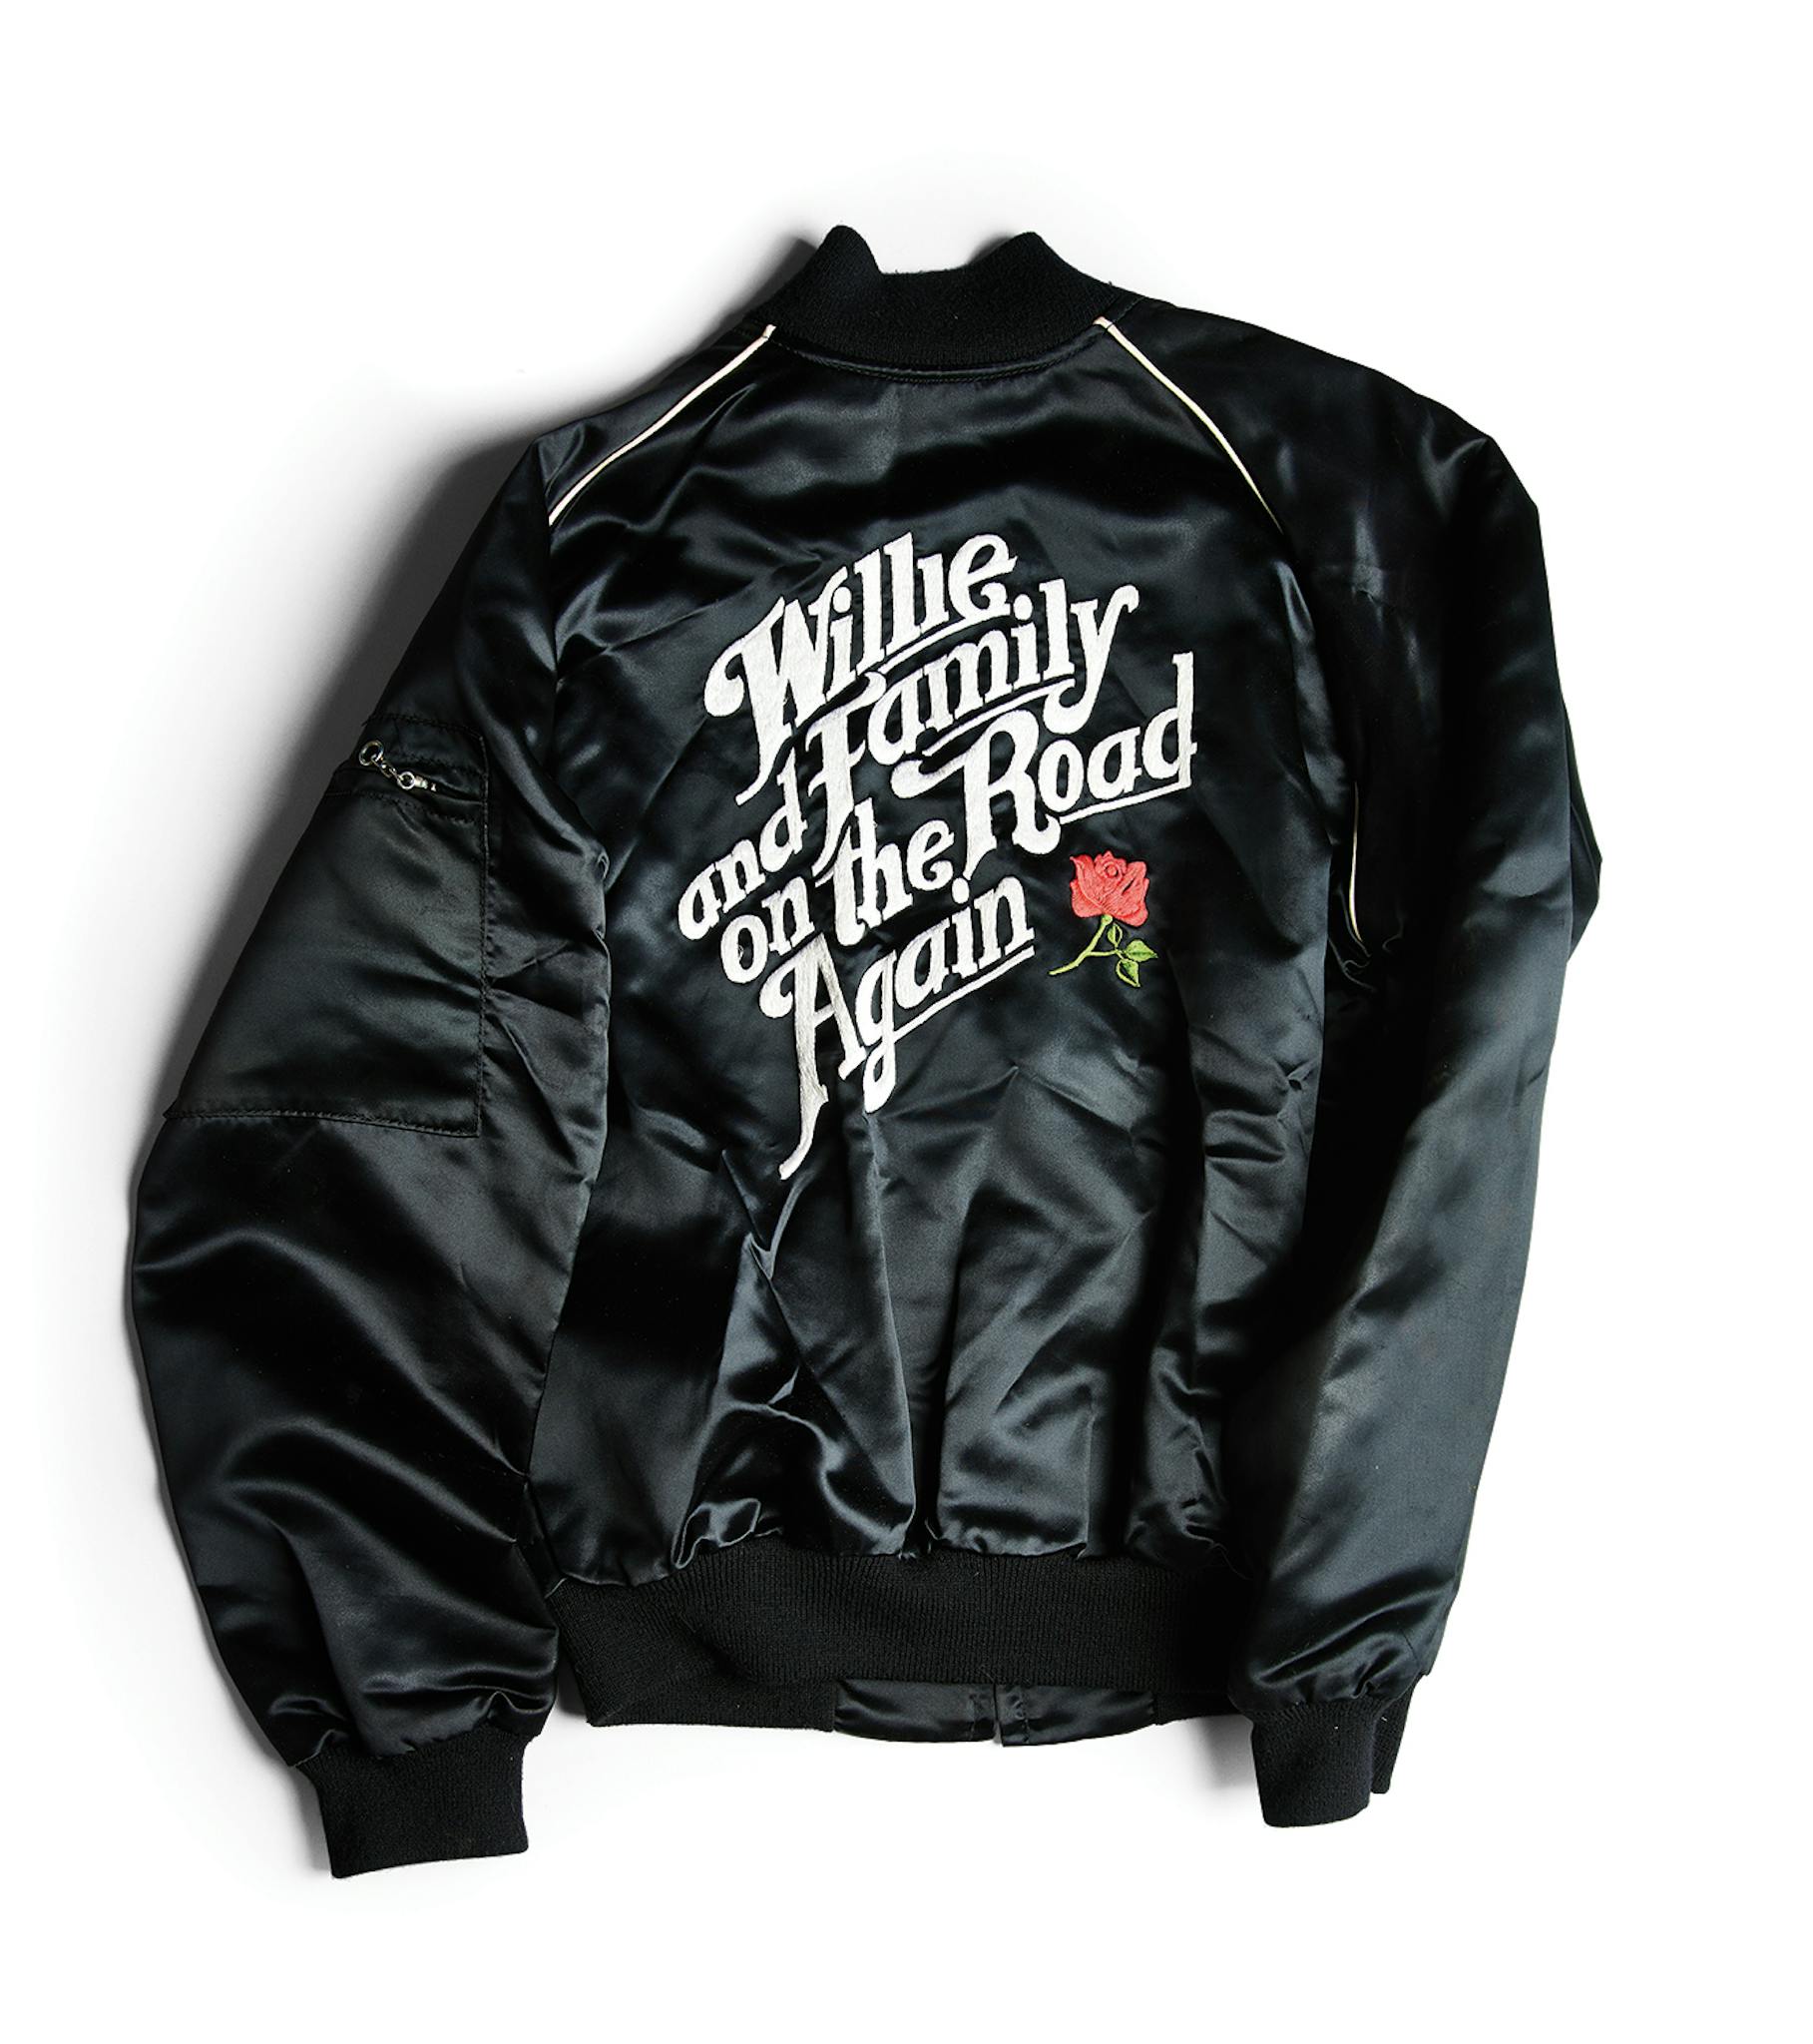 A satin jacket worn by Willie's friends and family.